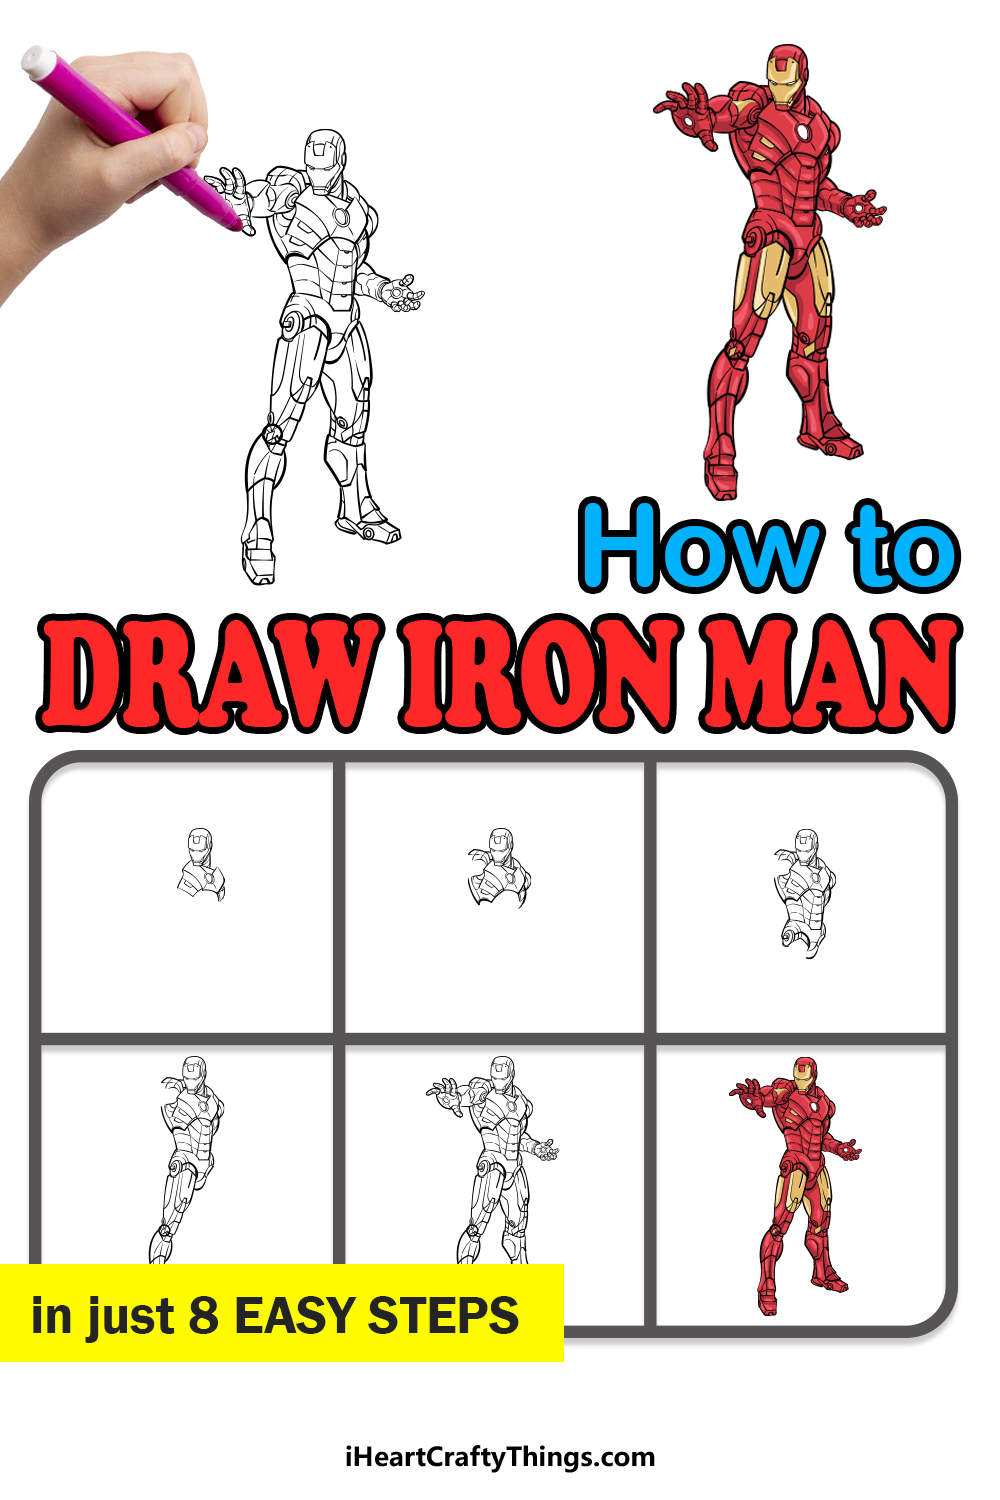 how to draw Iron Man in 8 steps